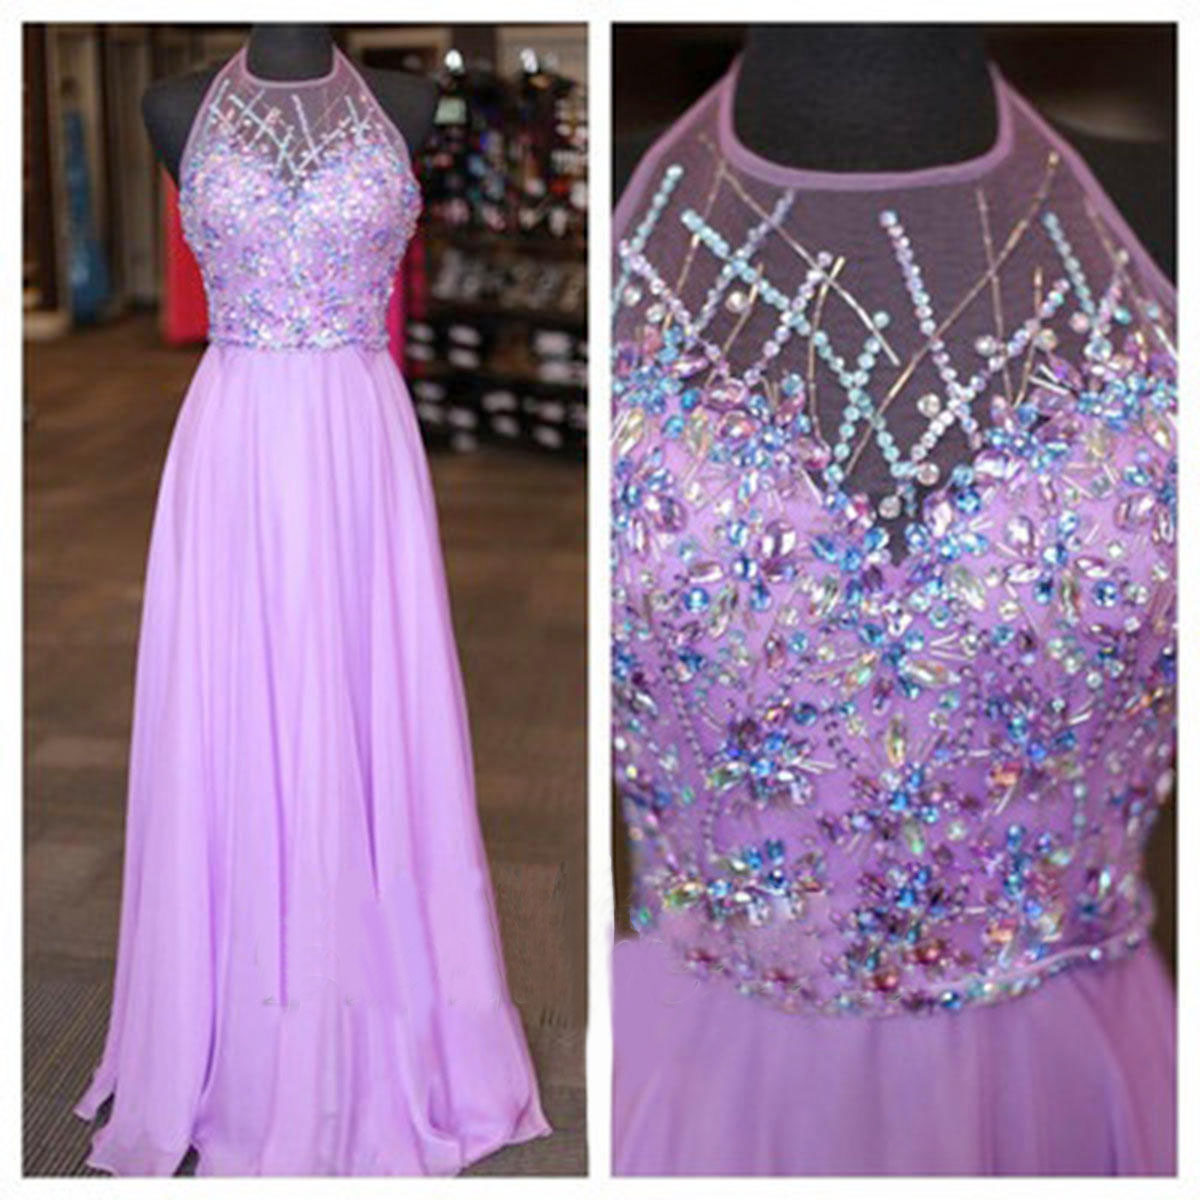 Lilac Prom Dresses, Beaded Prom Dress, Sexy Prom Dresses, Prom Dresses, Prom Dresses, Sexy Prom Dresses, Dresses For Prom